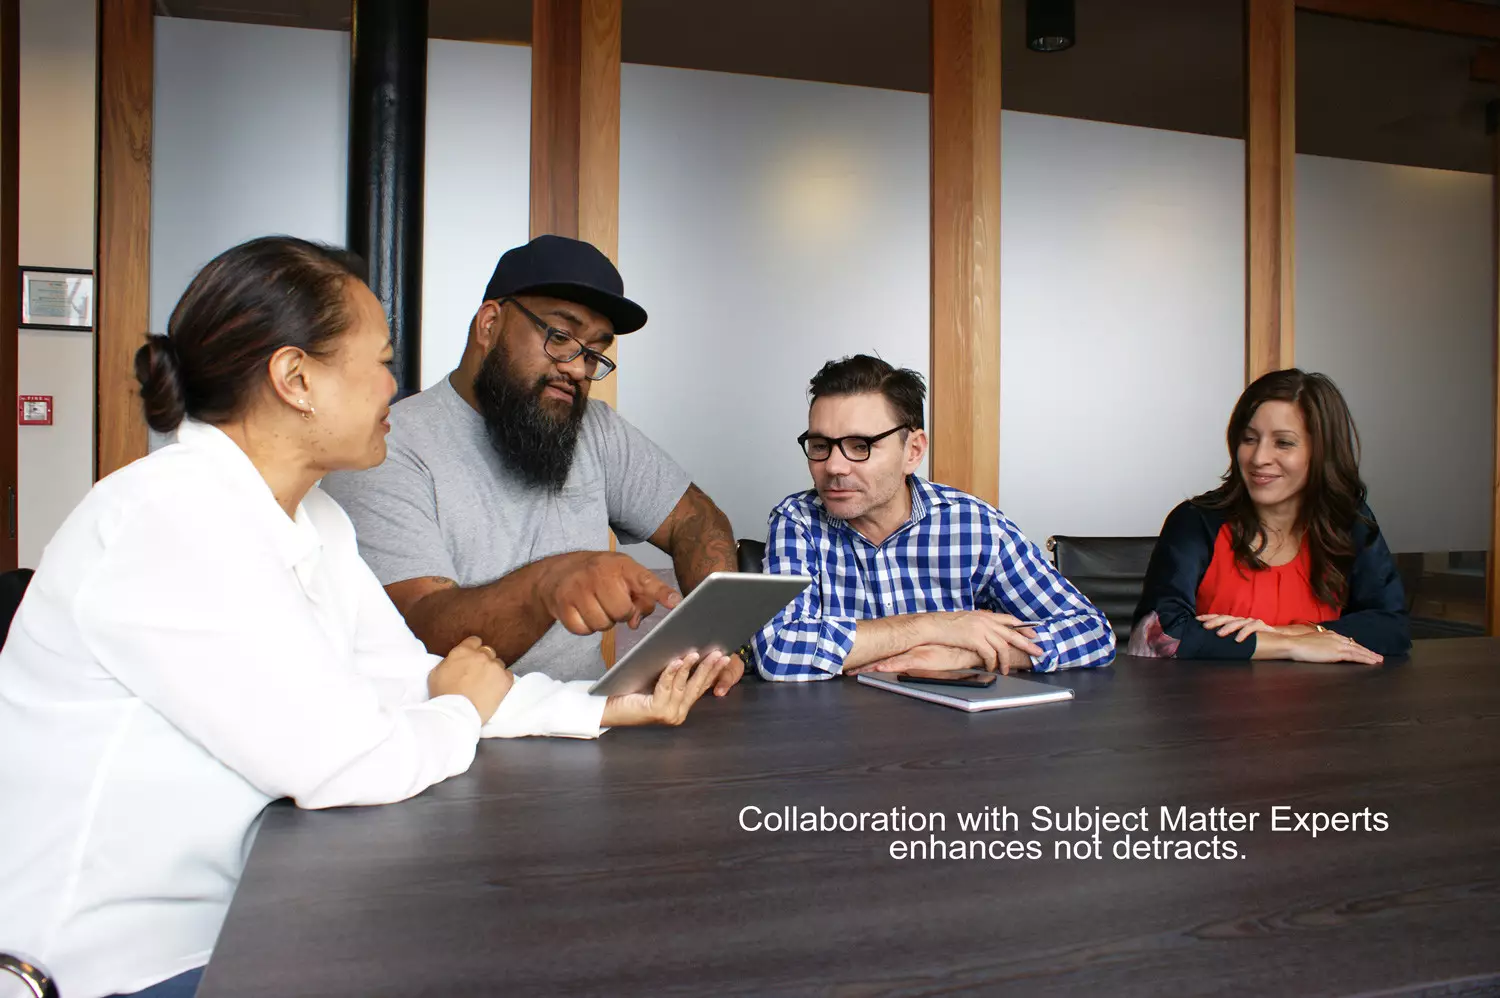 Collaborate with Subject Matter Experts as a matter of policy